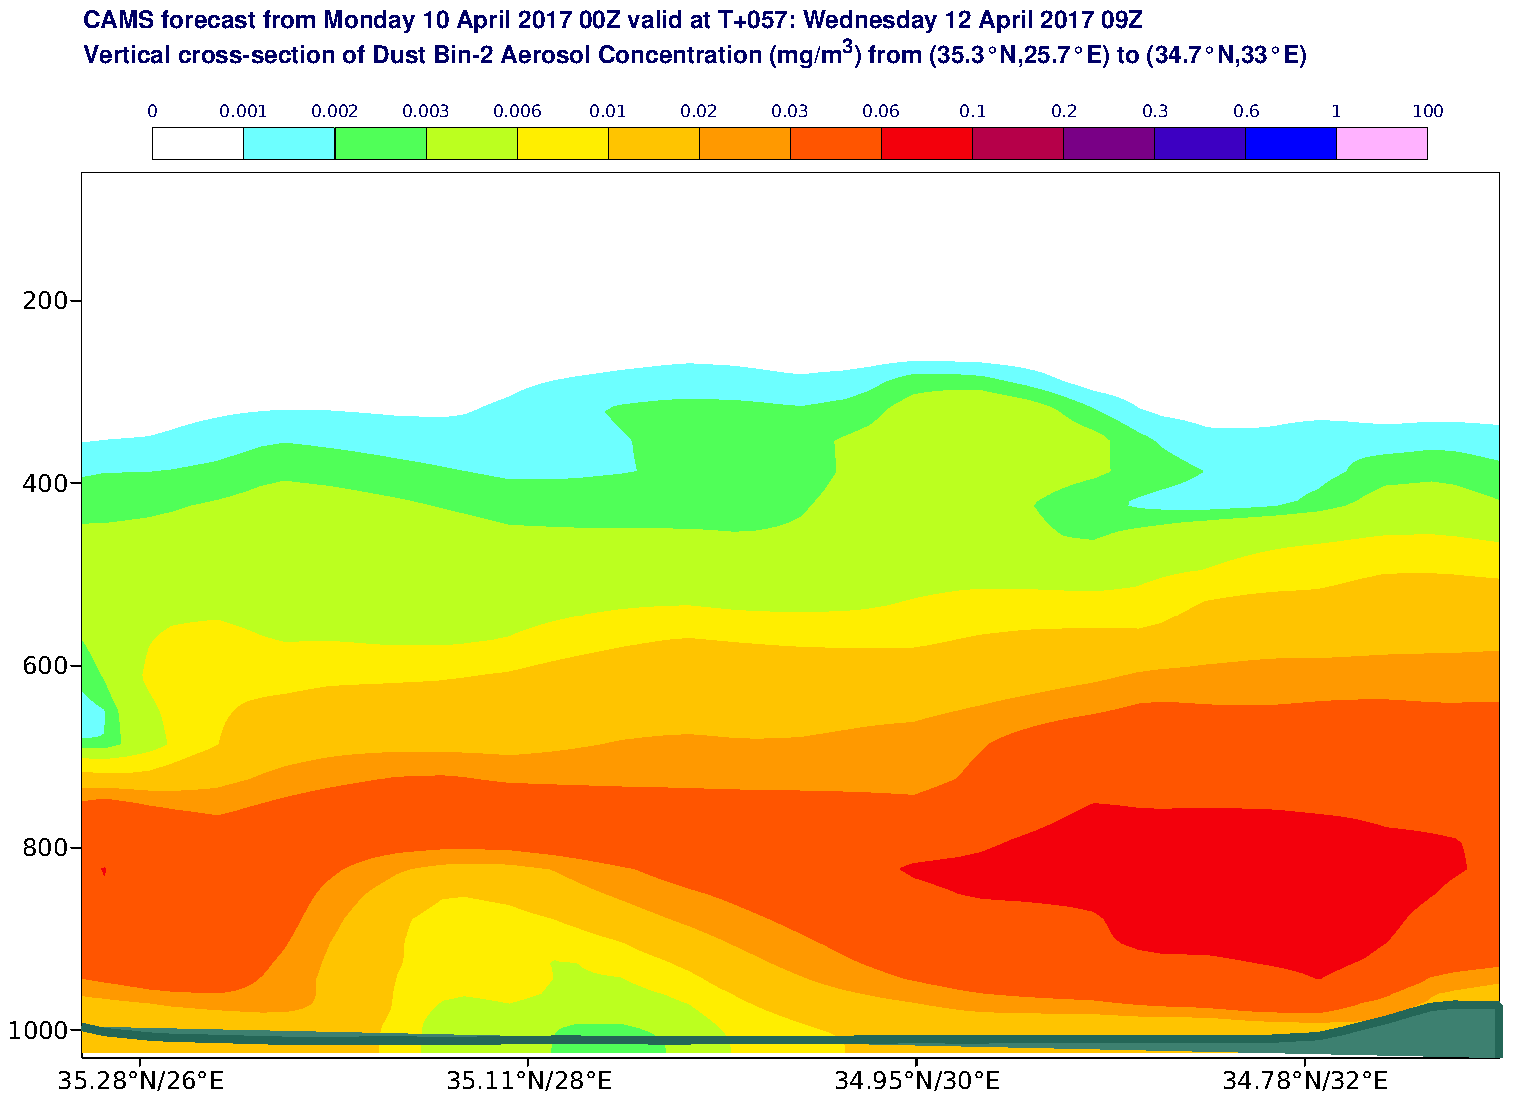 Vertical cross-section of Dust Bin-2 Aerosol Concentration (mg/m3) valid at T57 - 2017-04-12 09:00